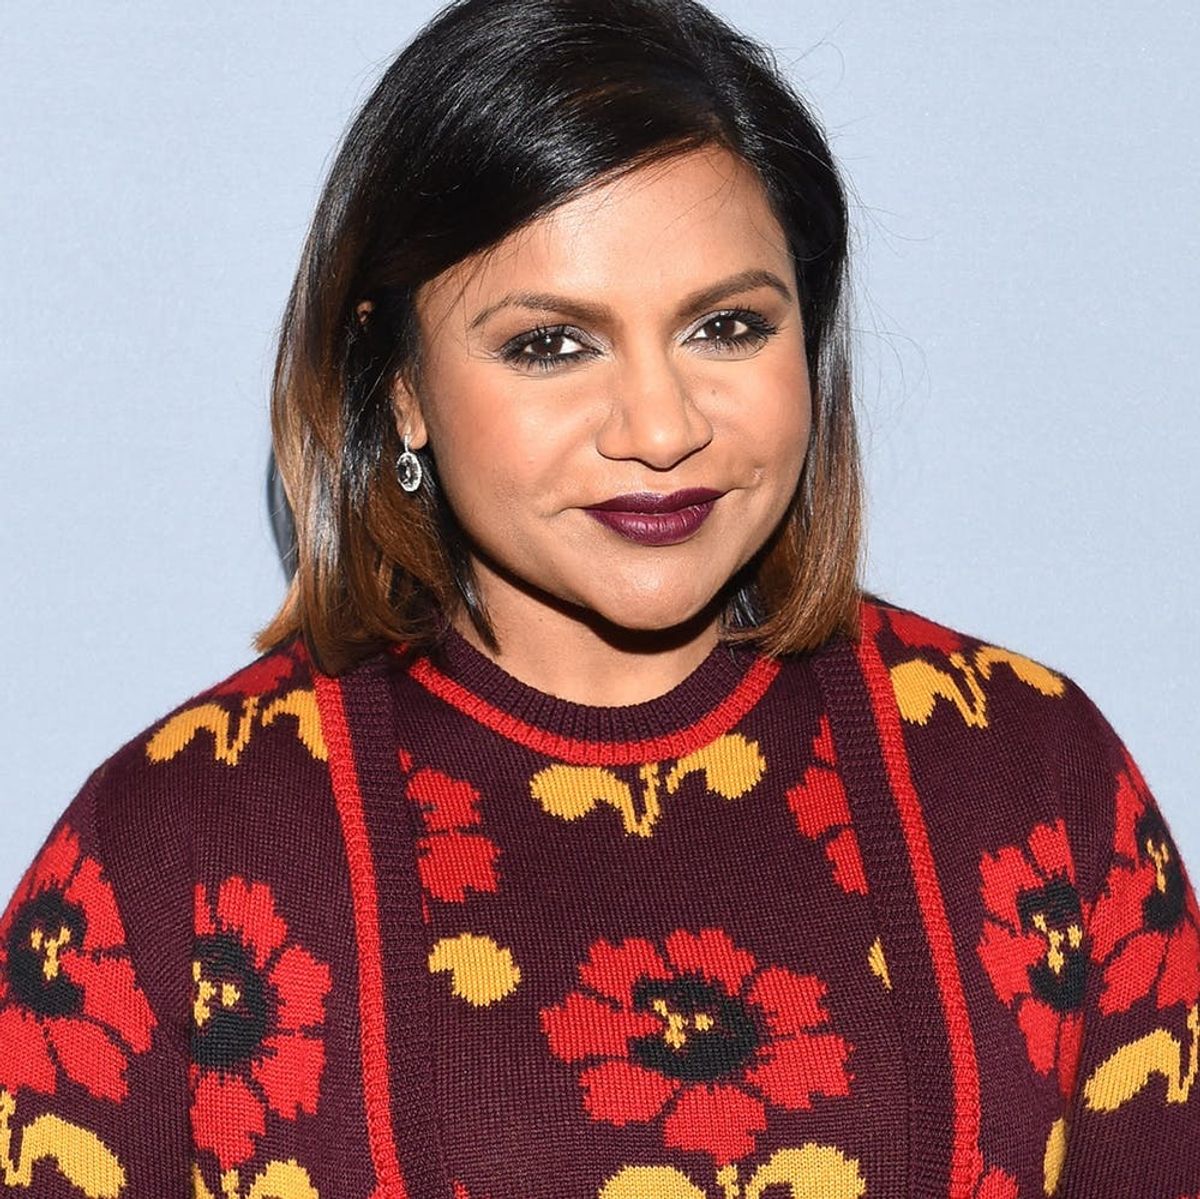 Mindy Kaling’s Homemade Cards Are the Best Last Minute Easter DIY